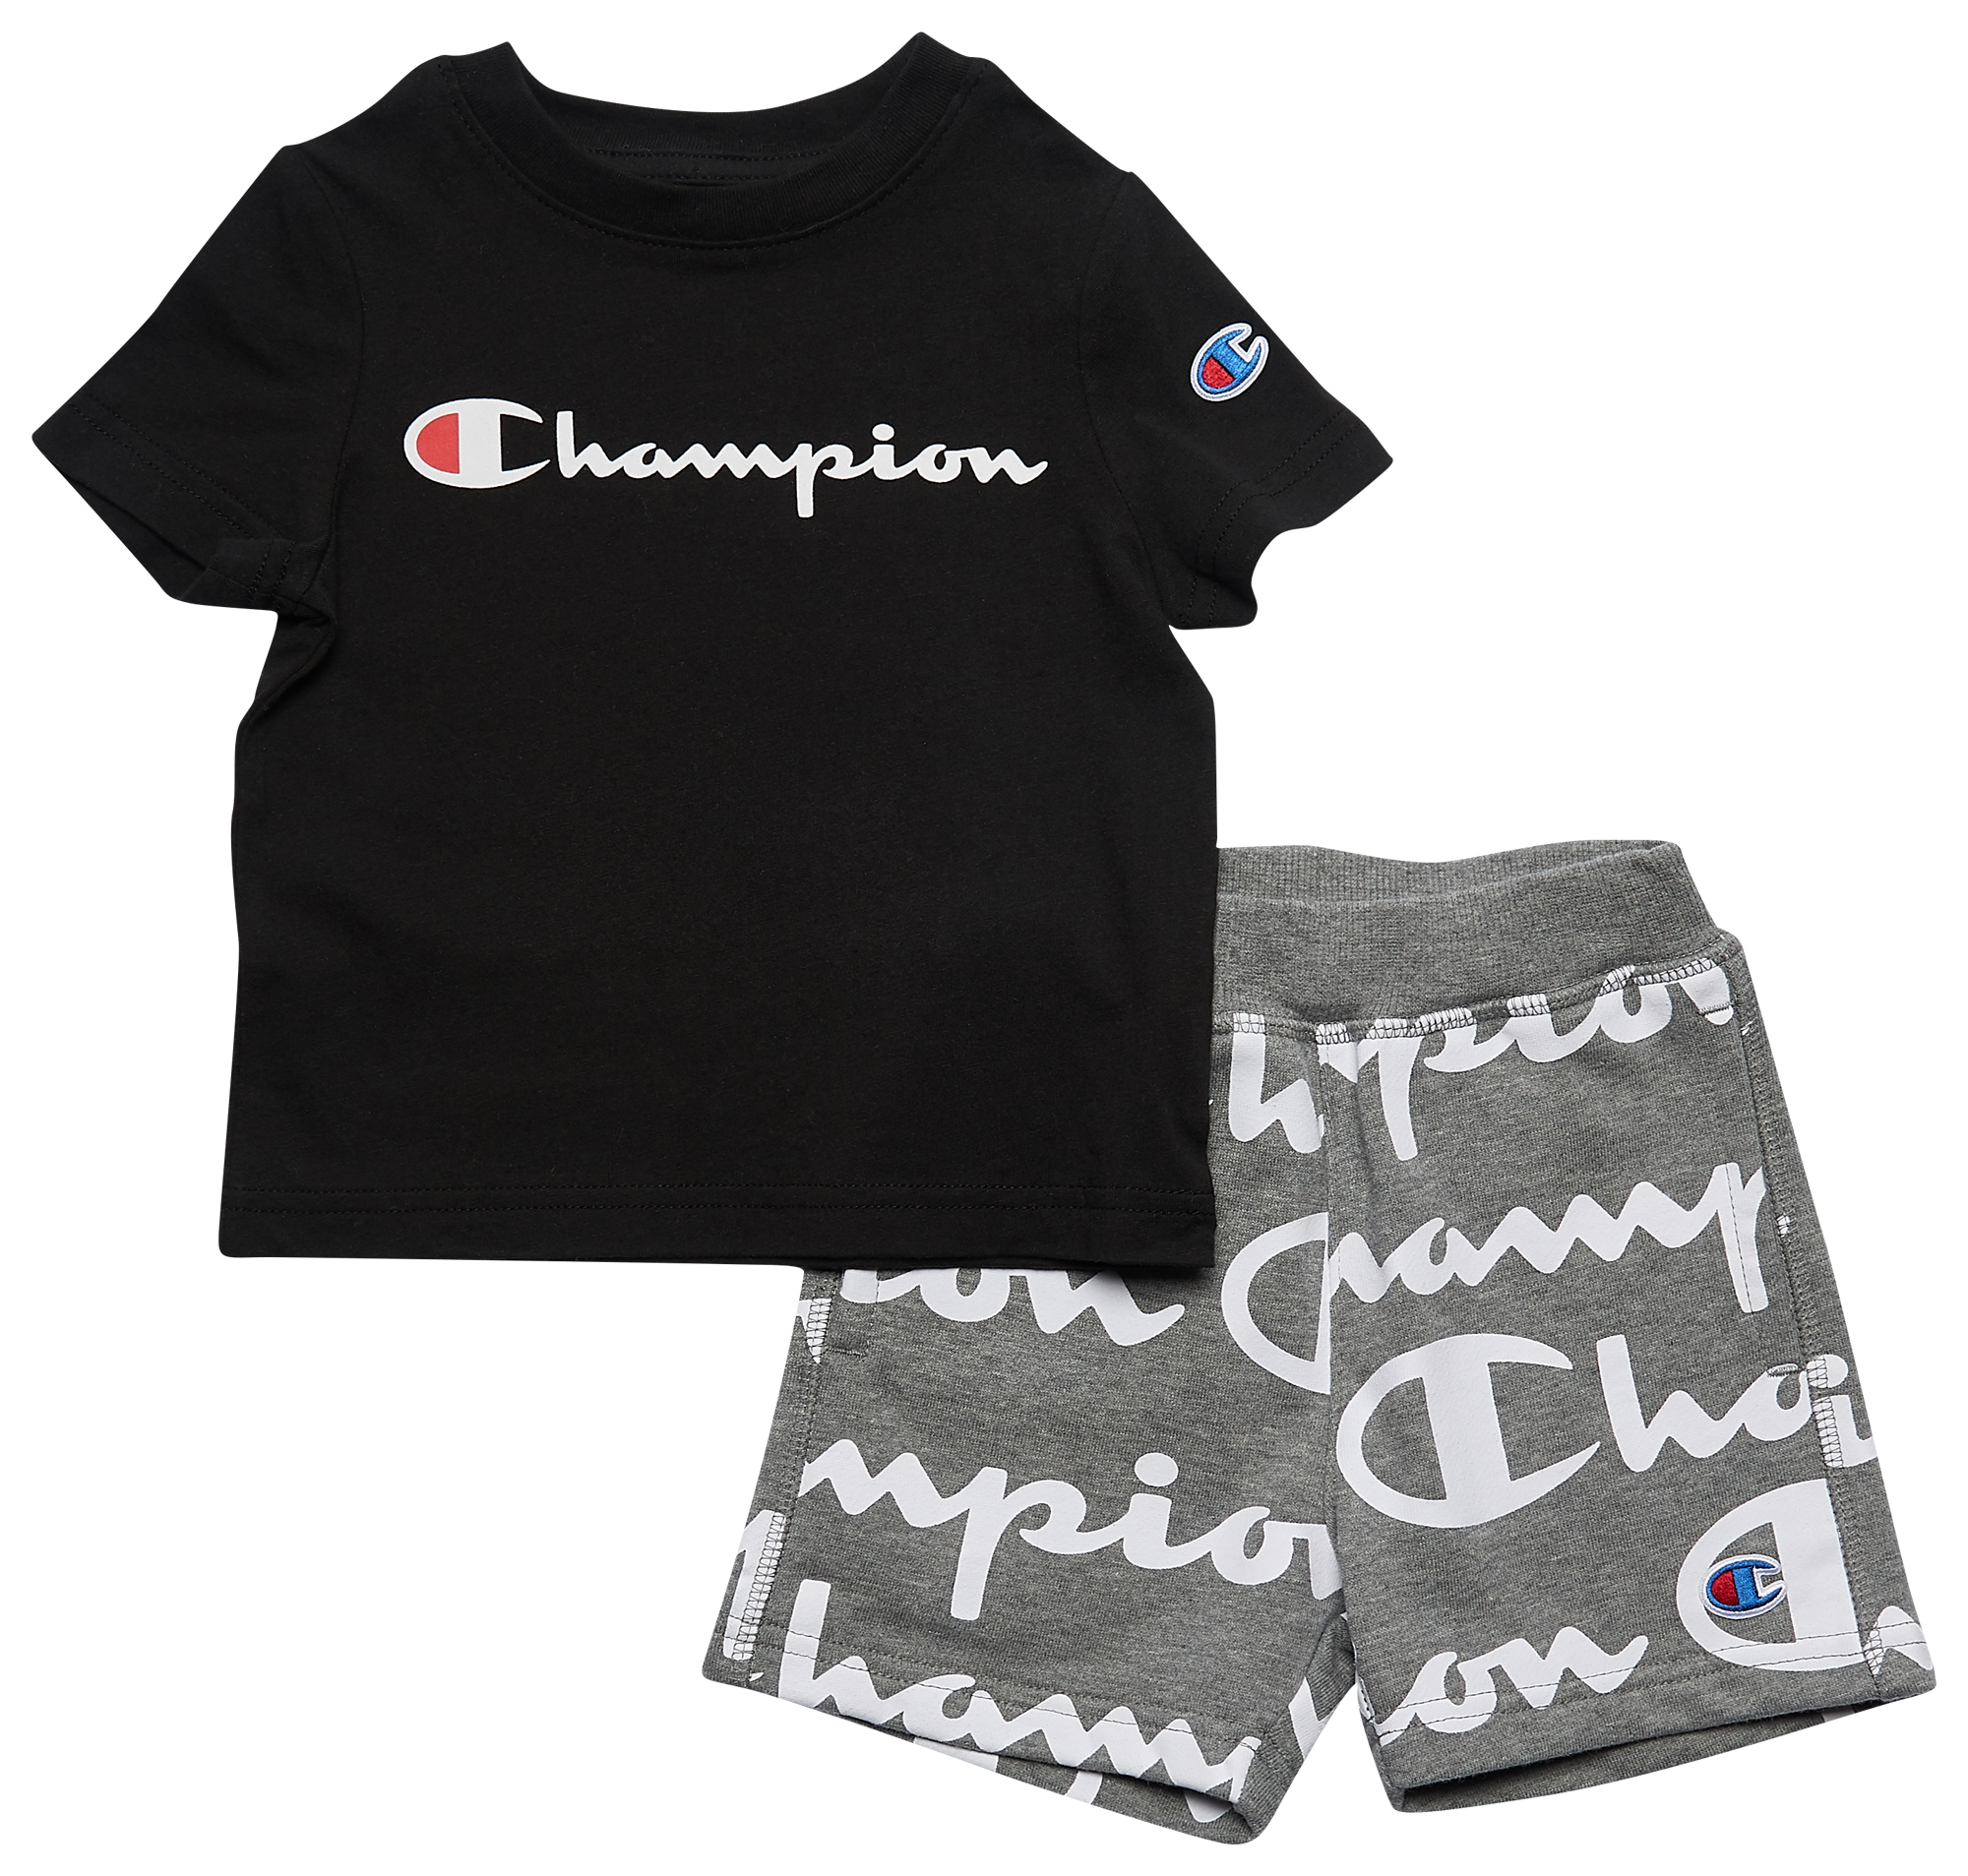 baby girl champion outfit